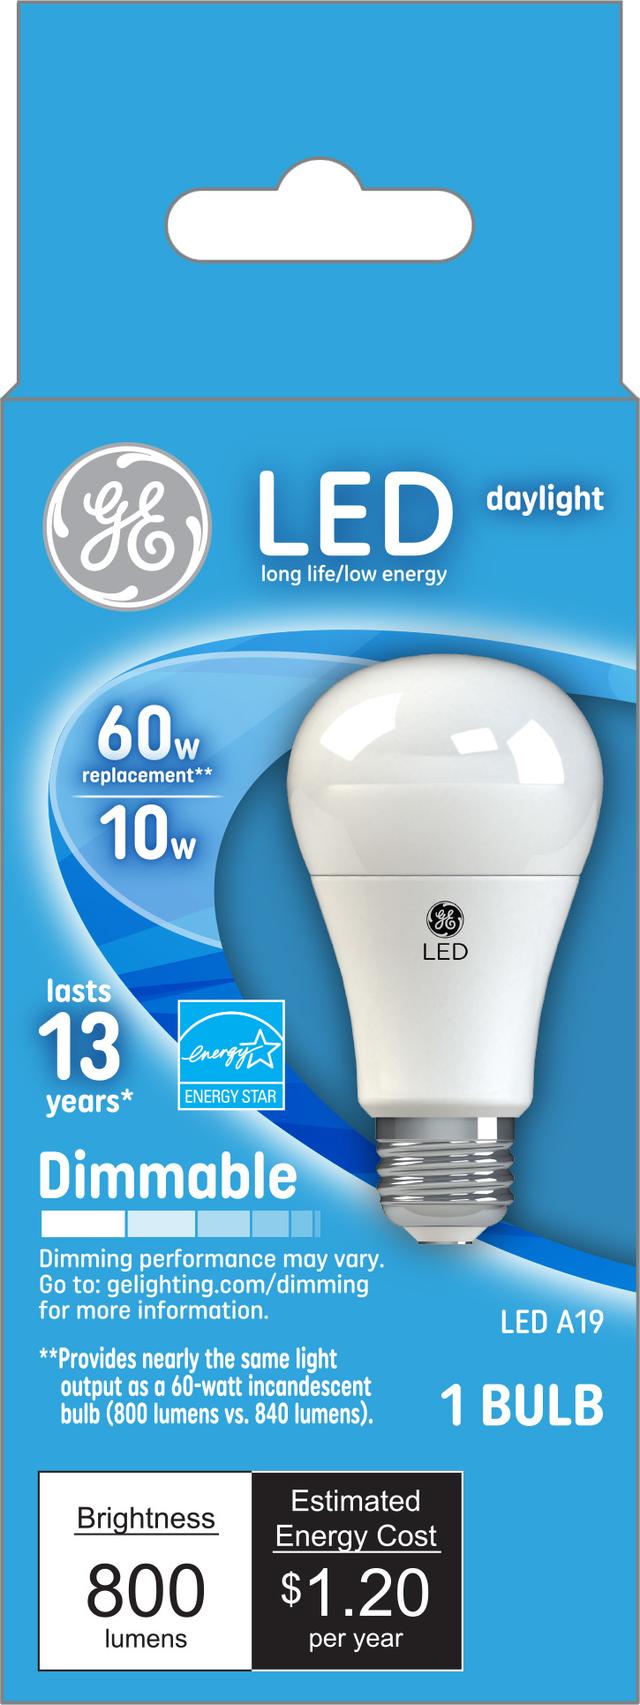 GE Classic LED 60 Watt Replacement, Daylight, A19 General Purpose Bulb (1 Pack)